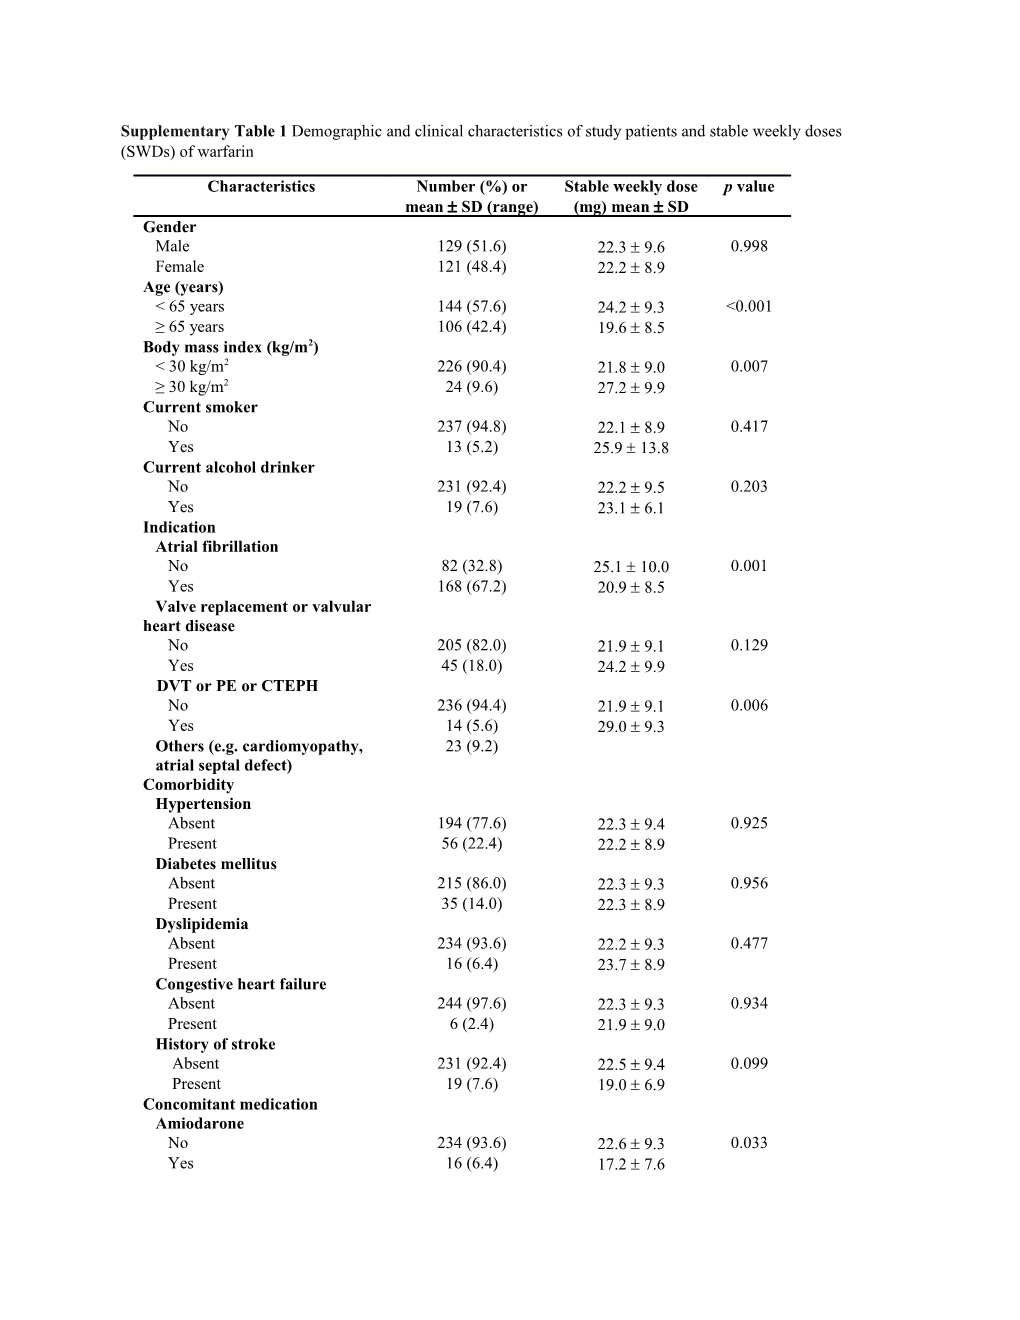 Supplementarytable 1 Demographic and Clinical Characteristics of Study Patients and Stable